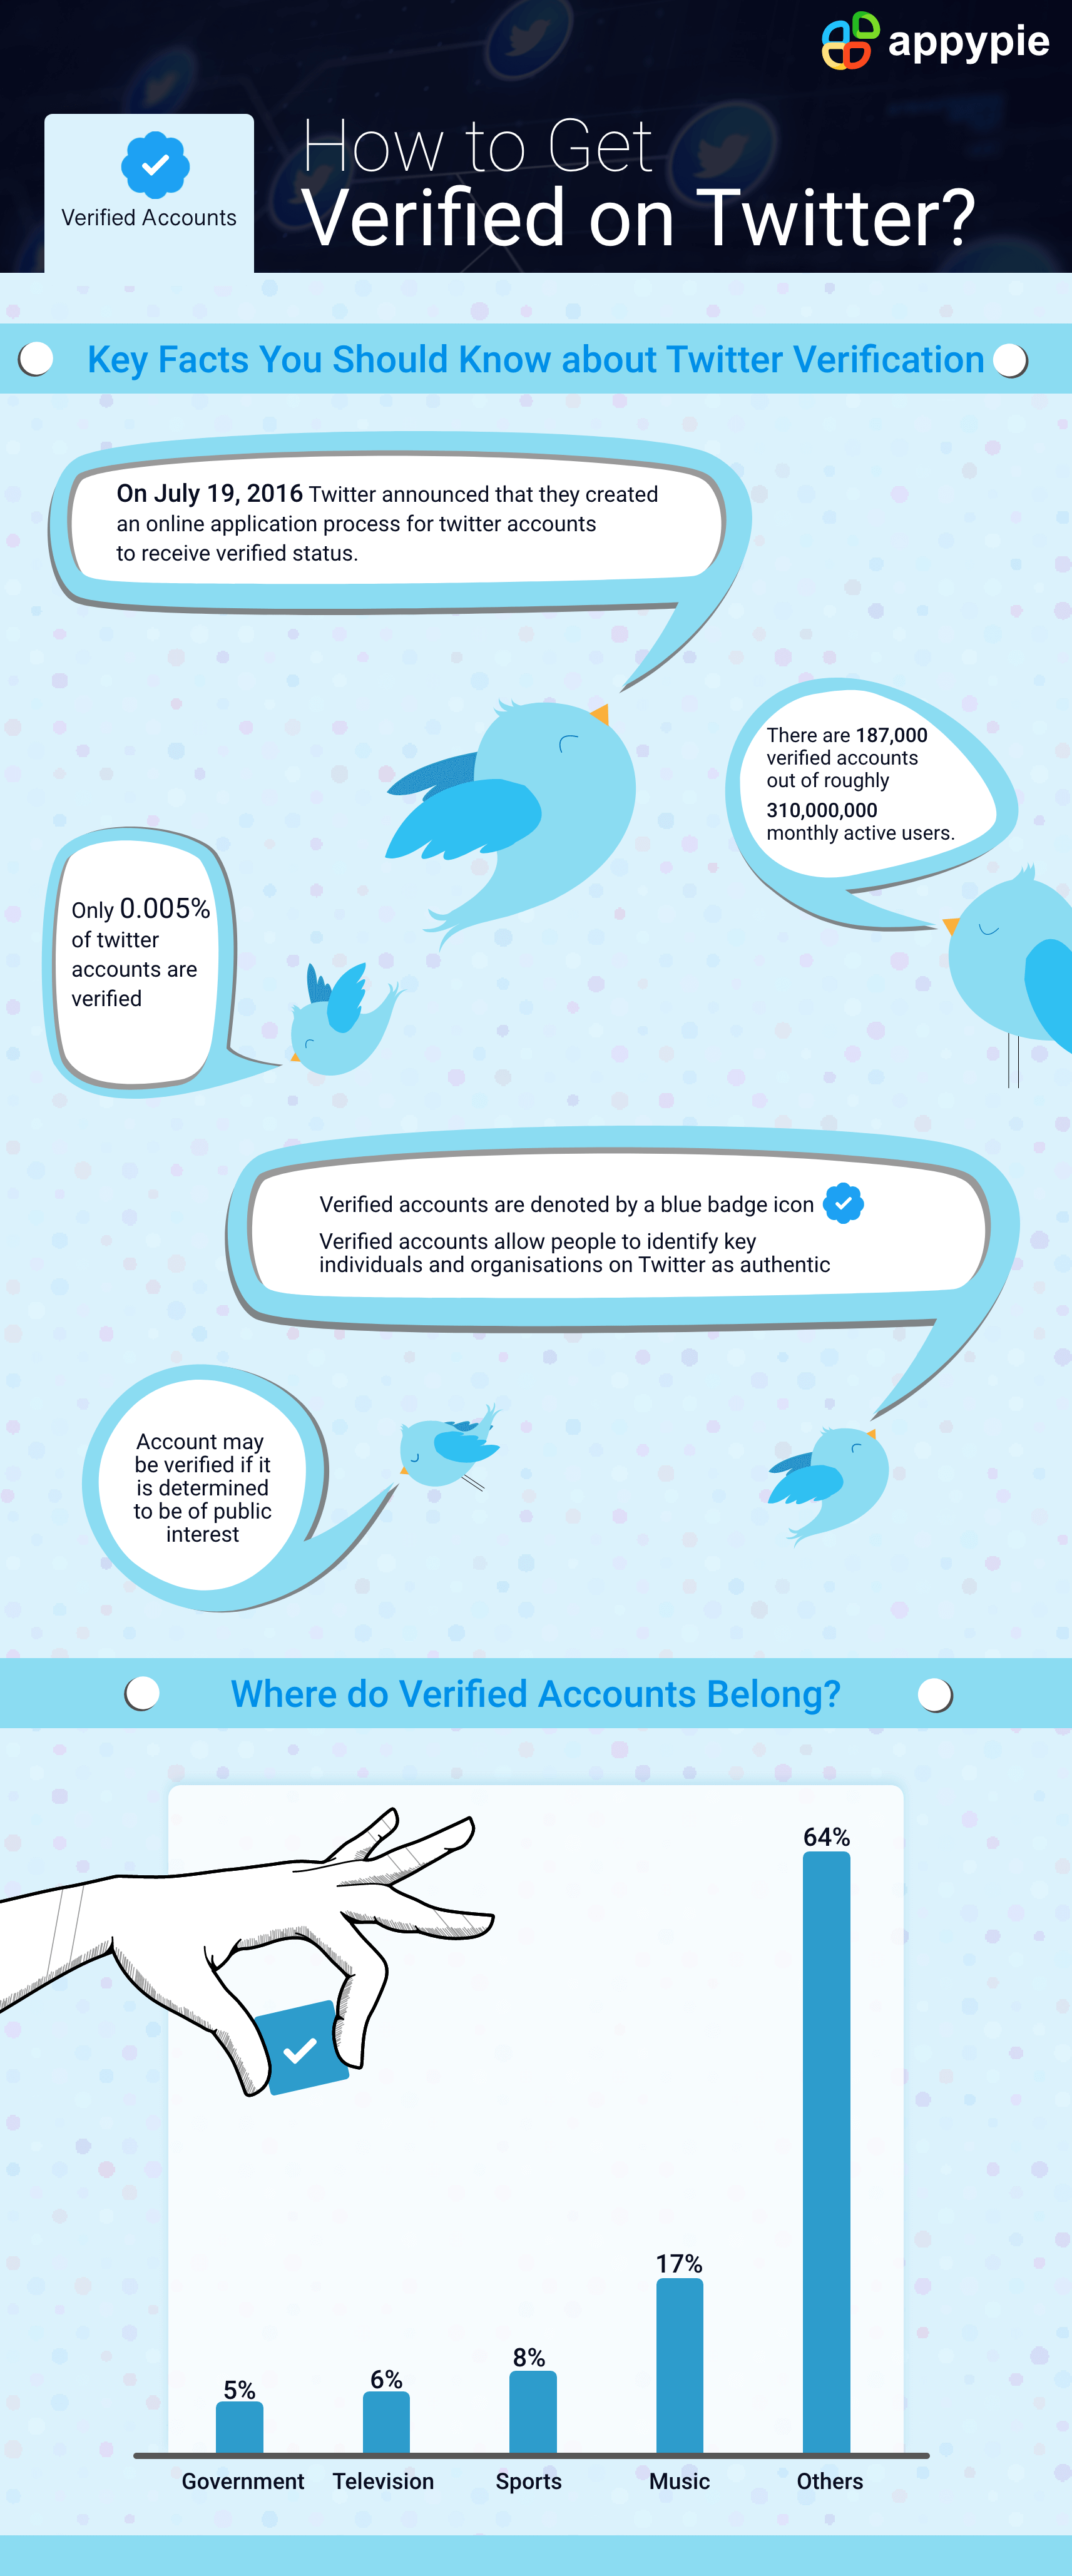 How to Get Verified on Twitter - Appy Pie